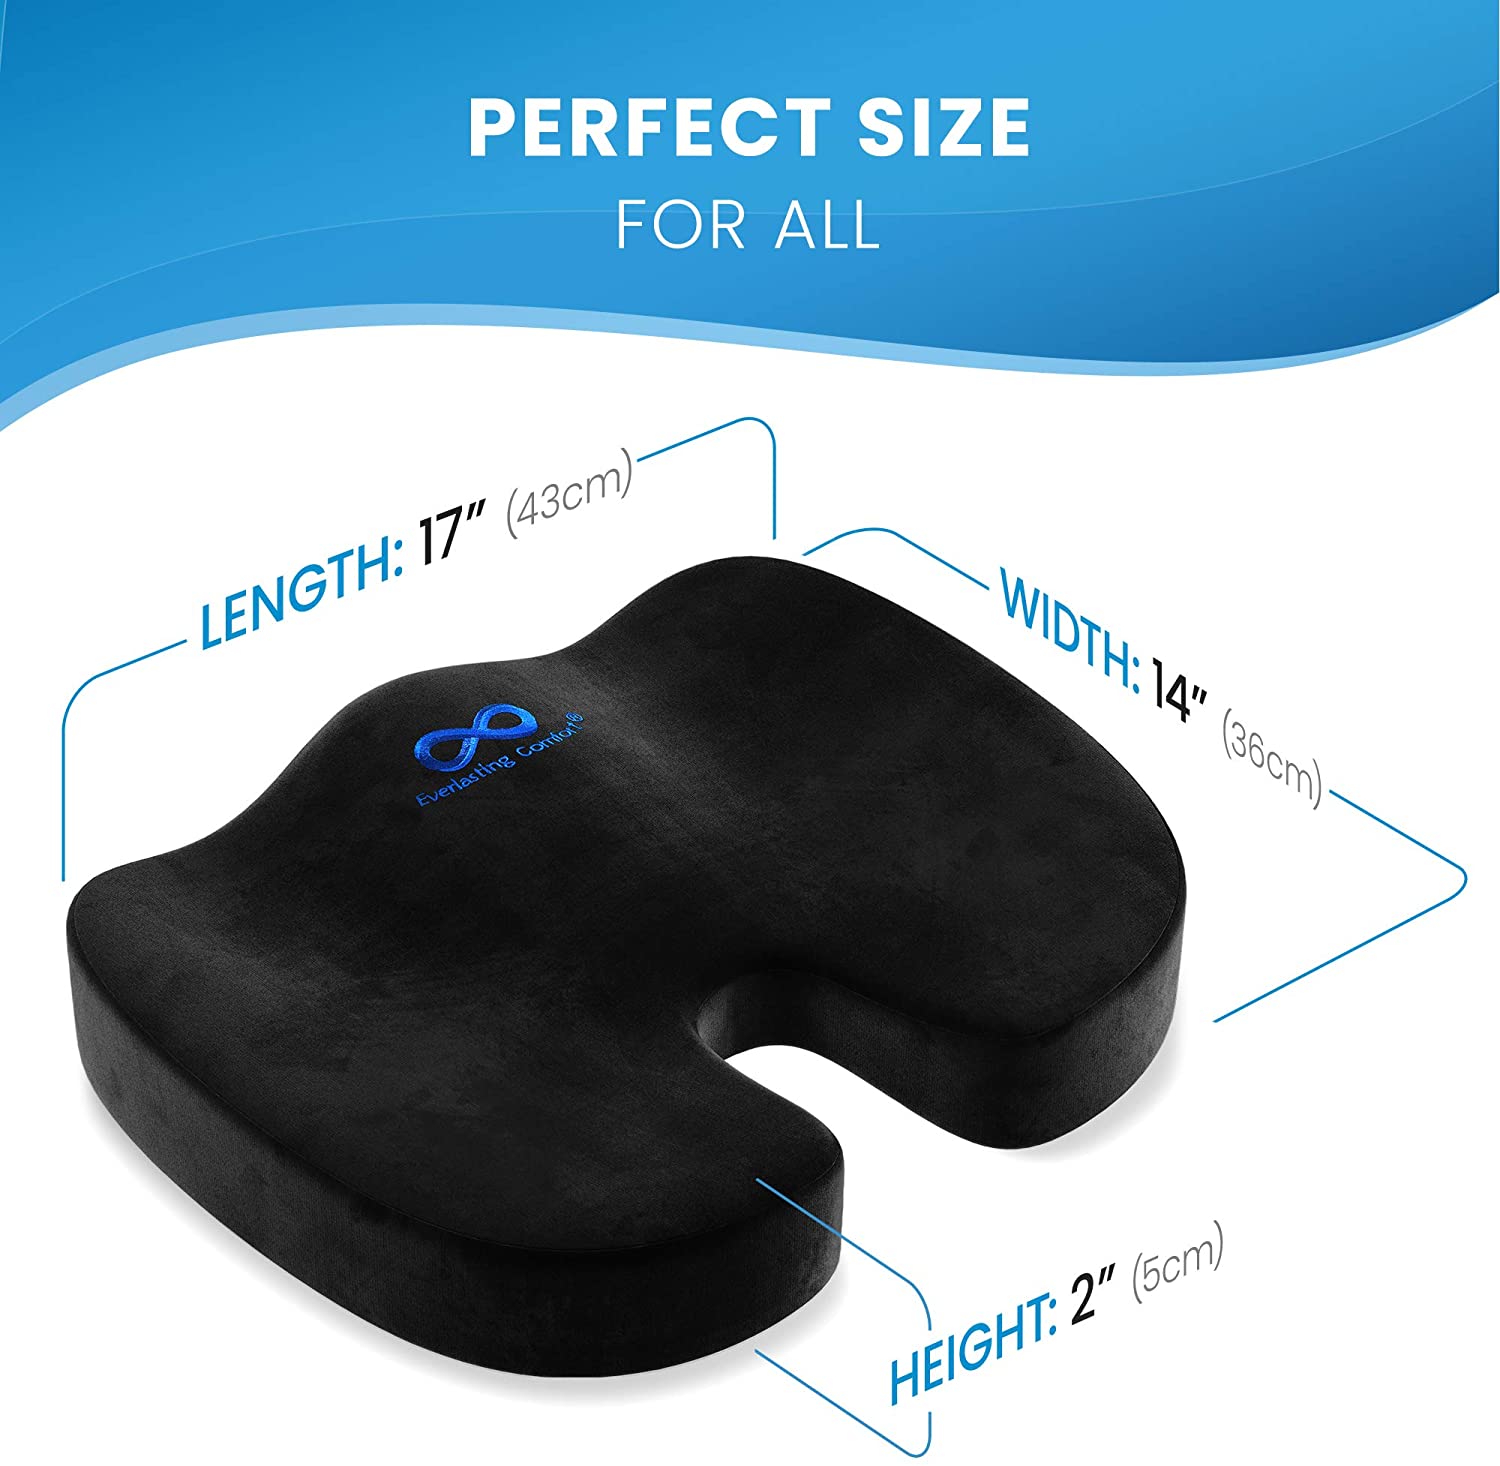 Everlasting Comfort Seat Cushion for Office Chair - Tailbone Cushion - Coccyx Cushion - Sciatica Pillow for Sitting (Black) - e4cents